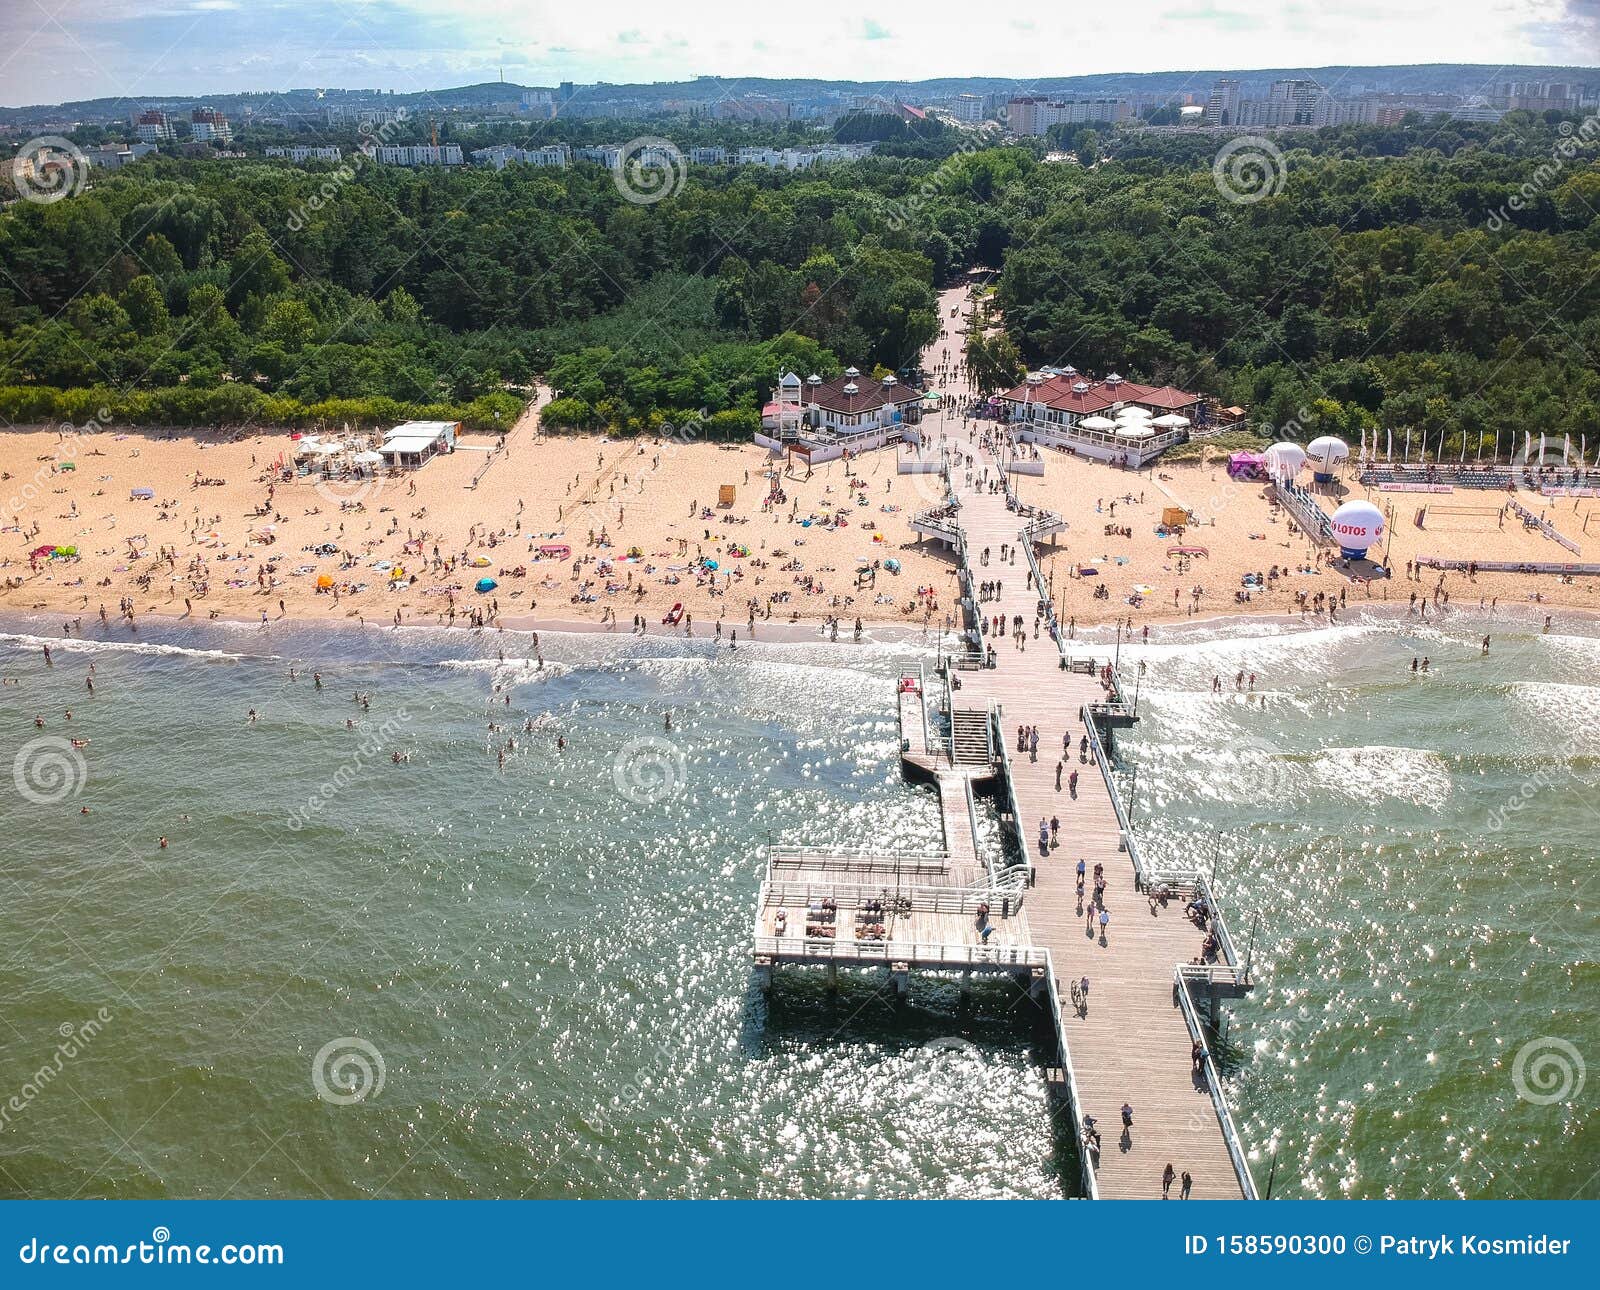 Gdansk, Poland - August 3, 2019: People Relaxing on the Beach with ...